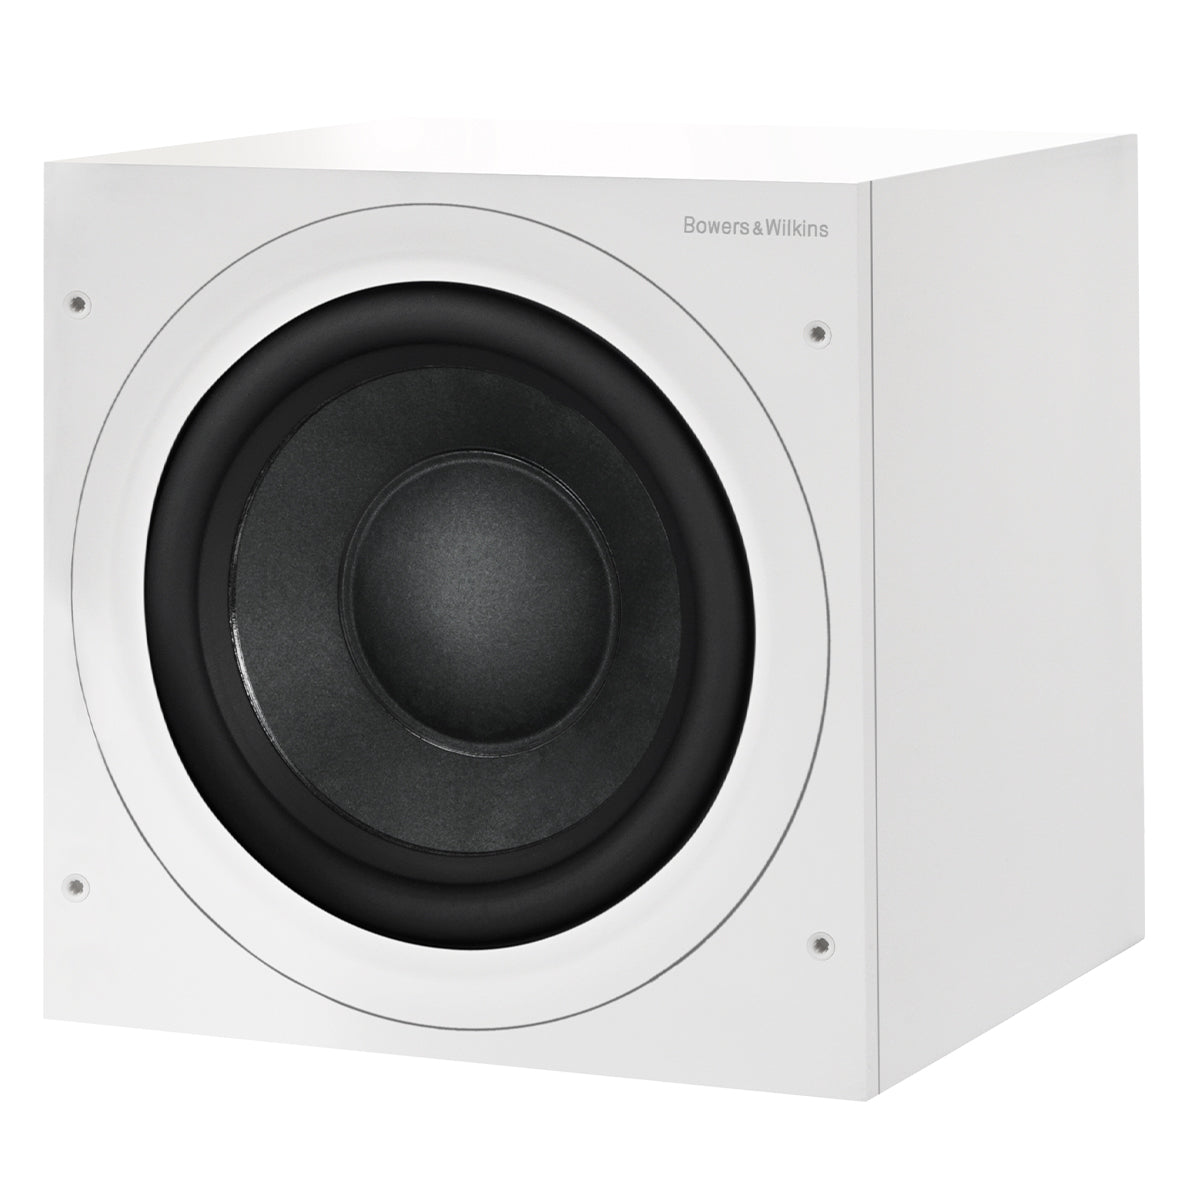 Bowers & Wilkins ASW610XP 10" 500W Subwoofer - White - The Audio Experts